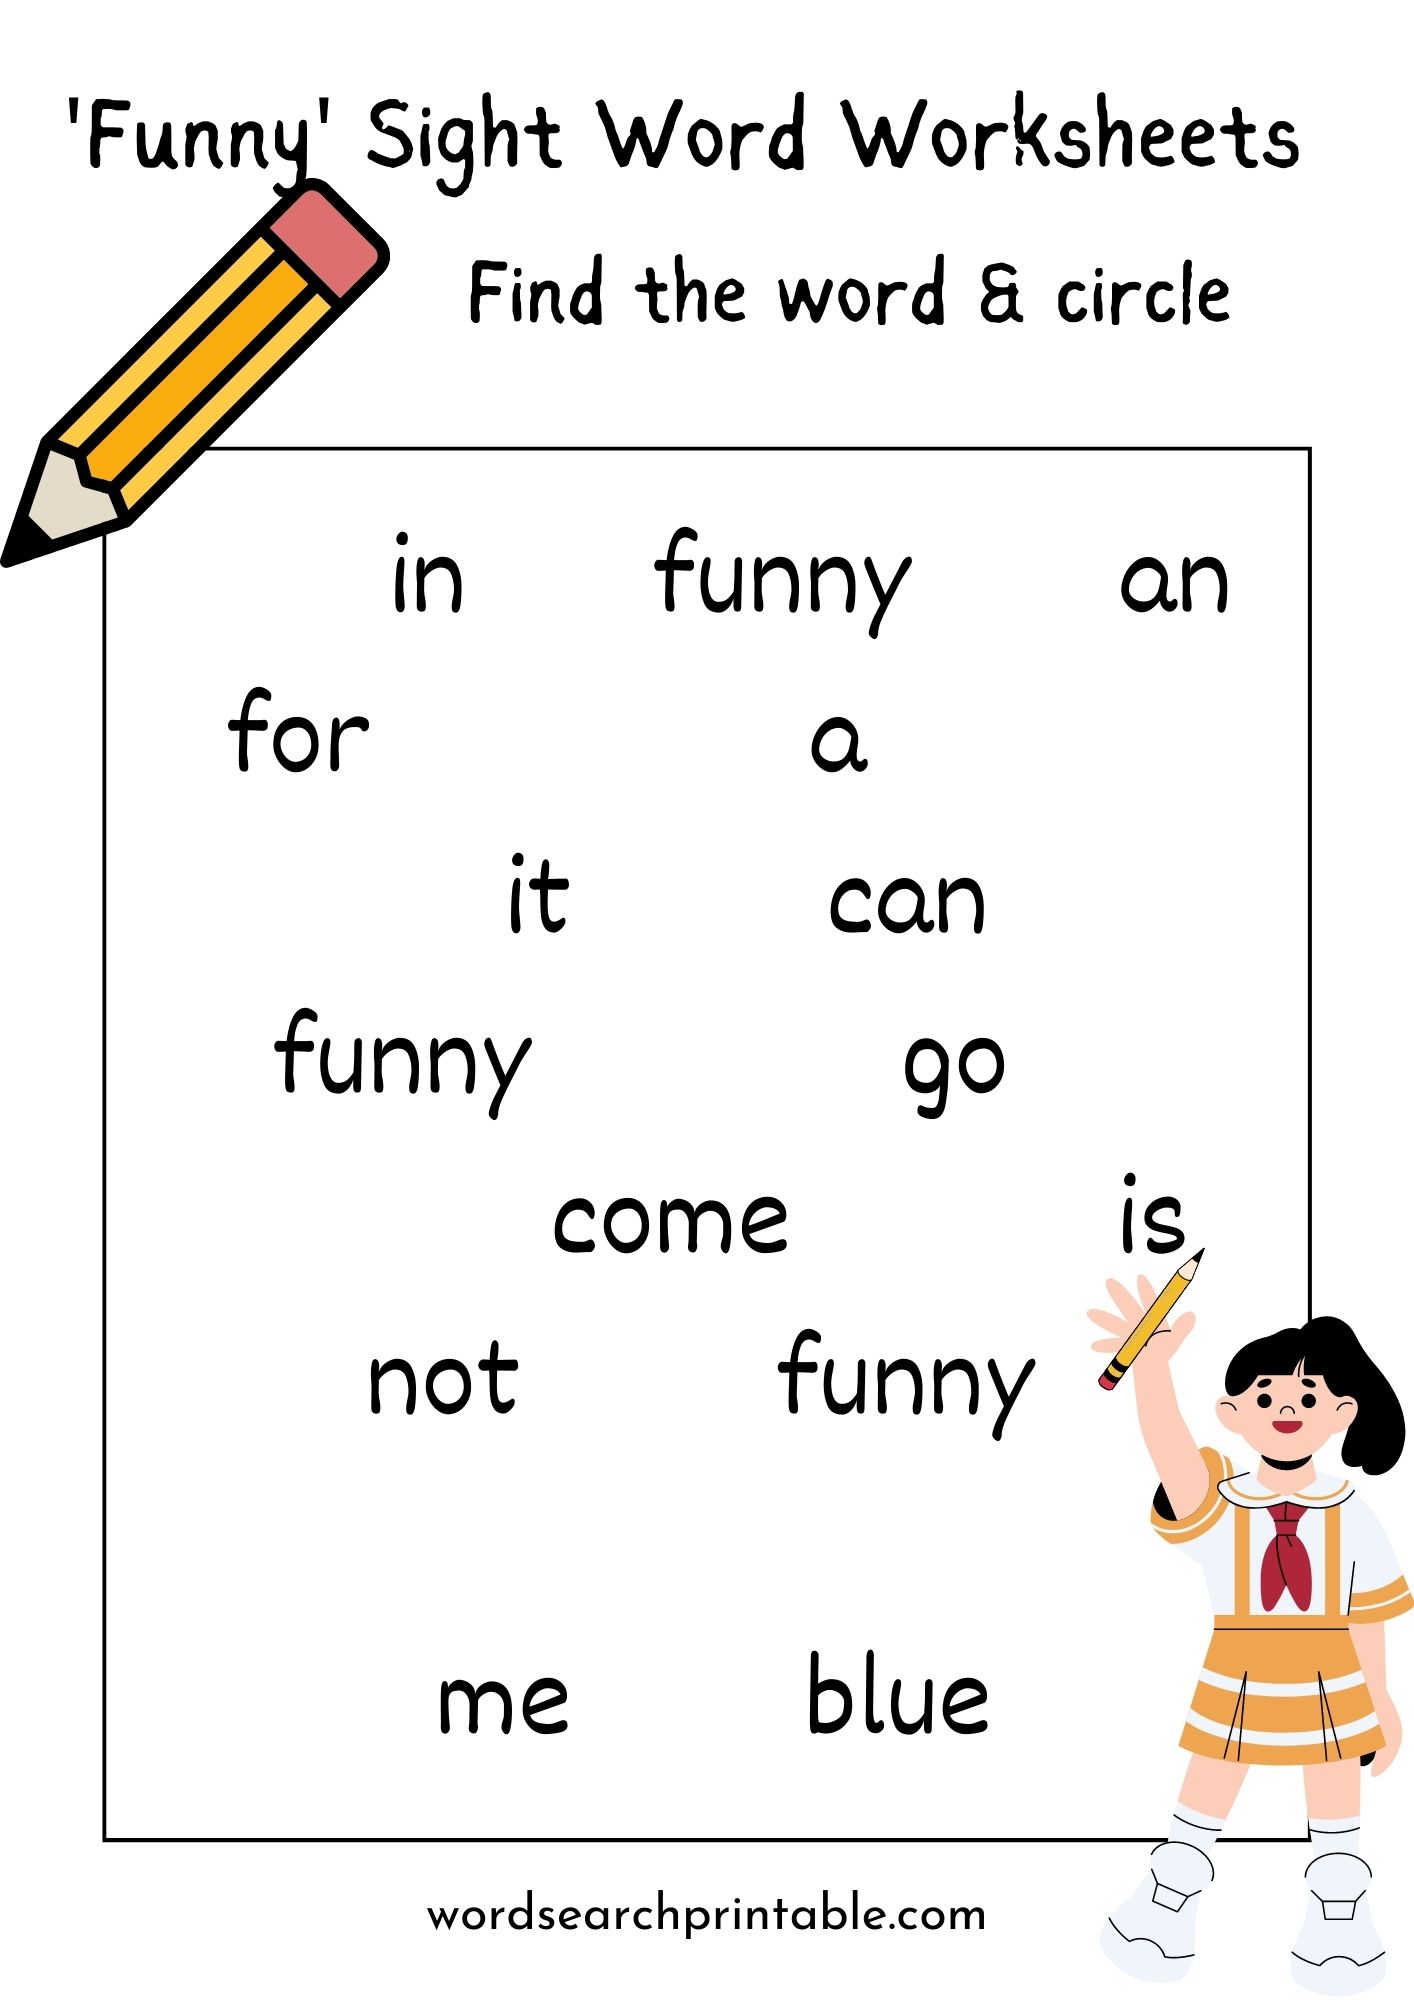 Find the sight word Funny and circle it